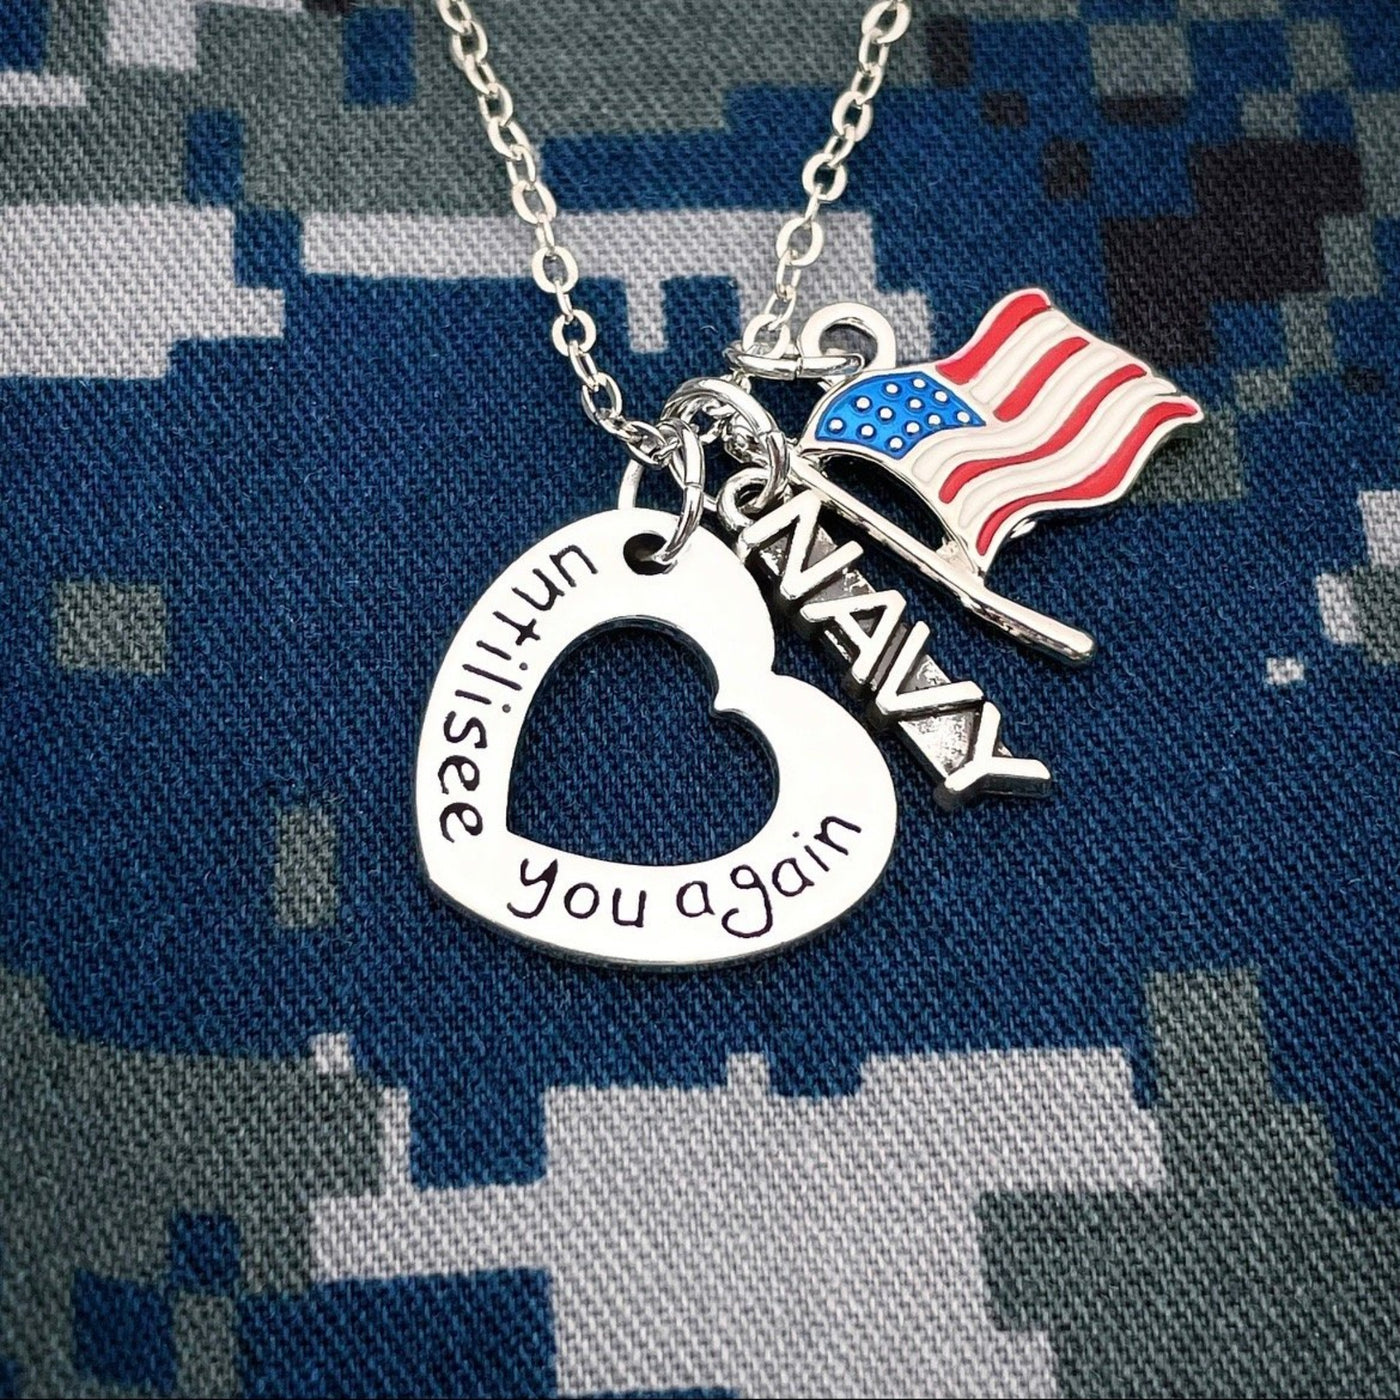 Until I See You Again Necklace - Navy